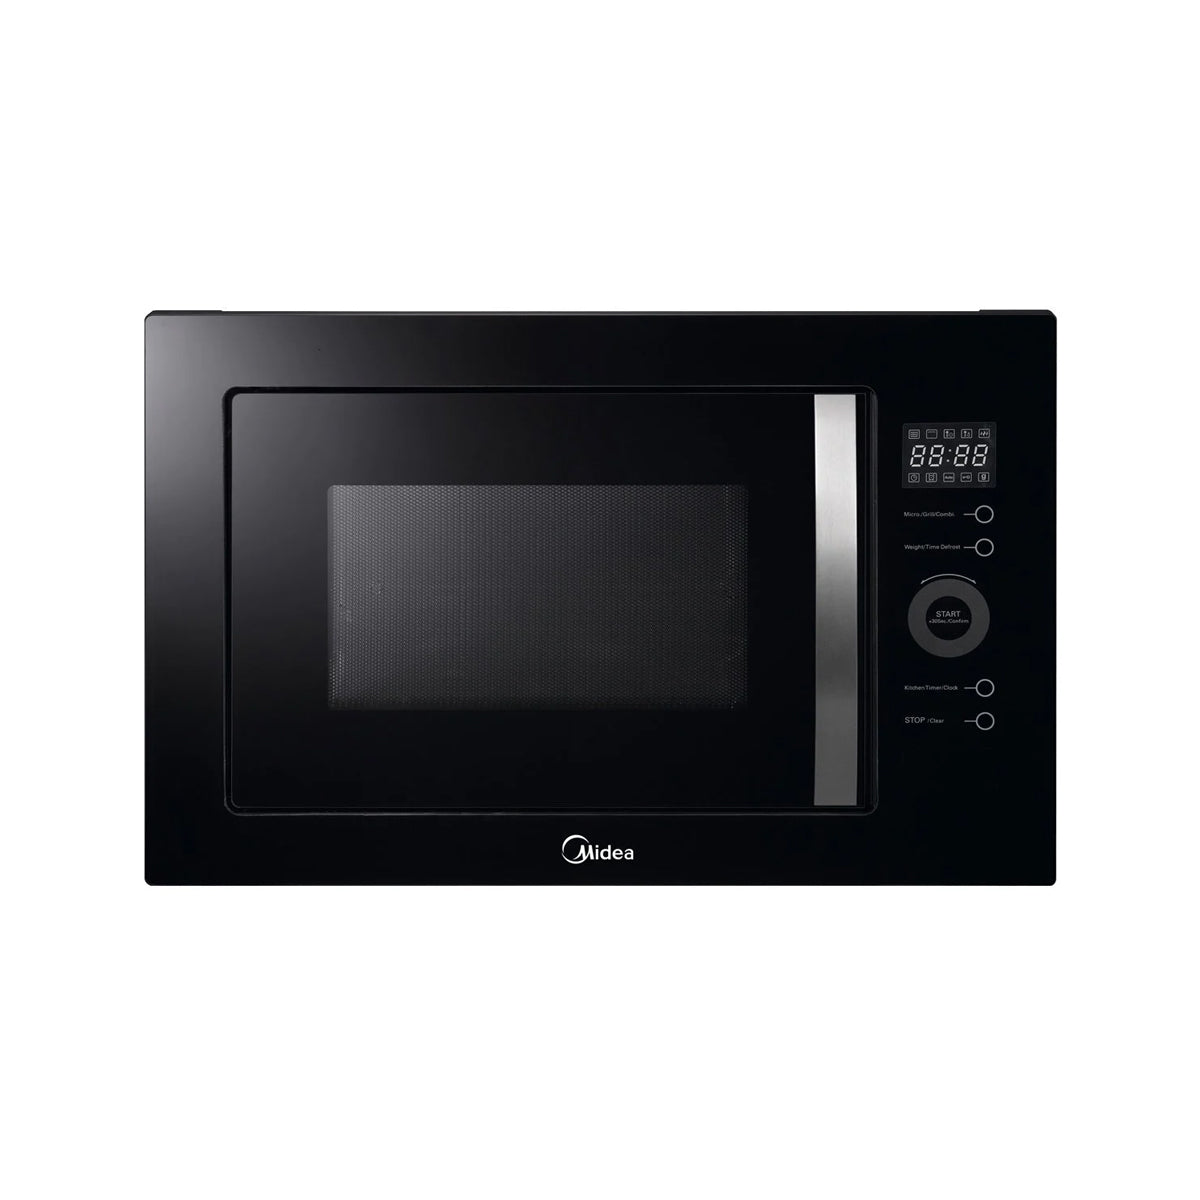 Midea 25L BL Built-in Frameless Microwave Oven with Grill